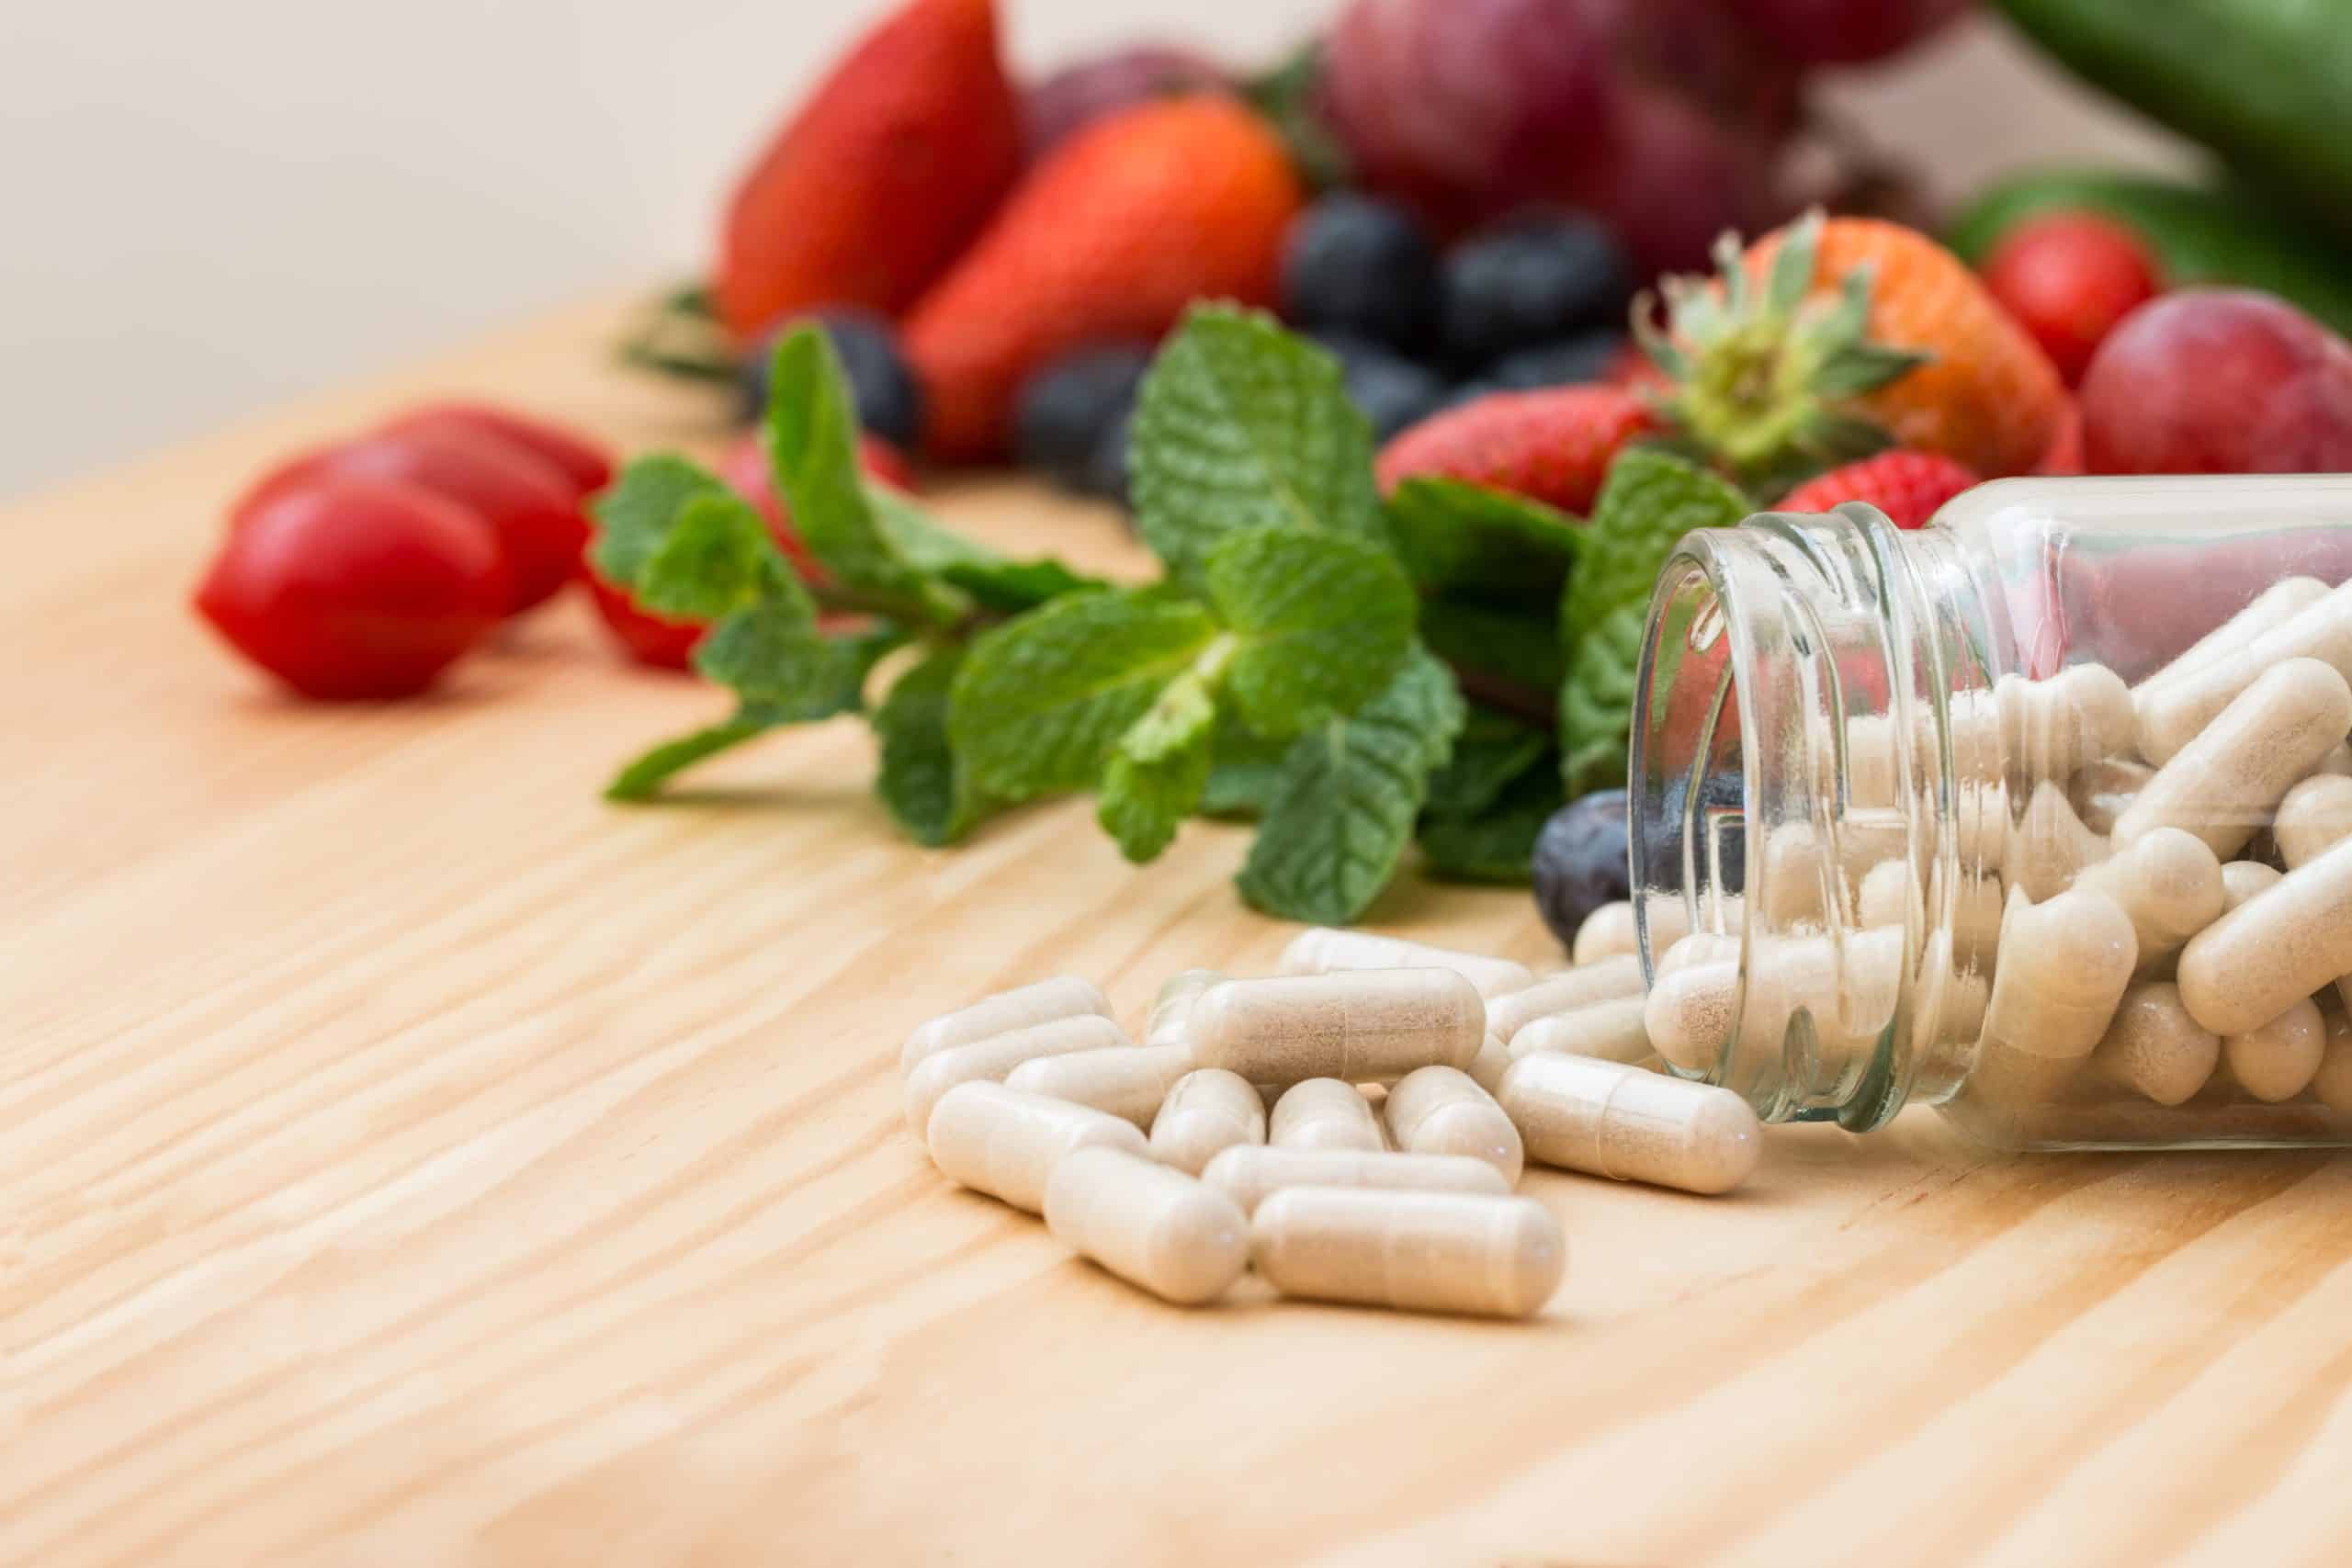 Can Vitamins and Dietary Supplements Improve Your Health?